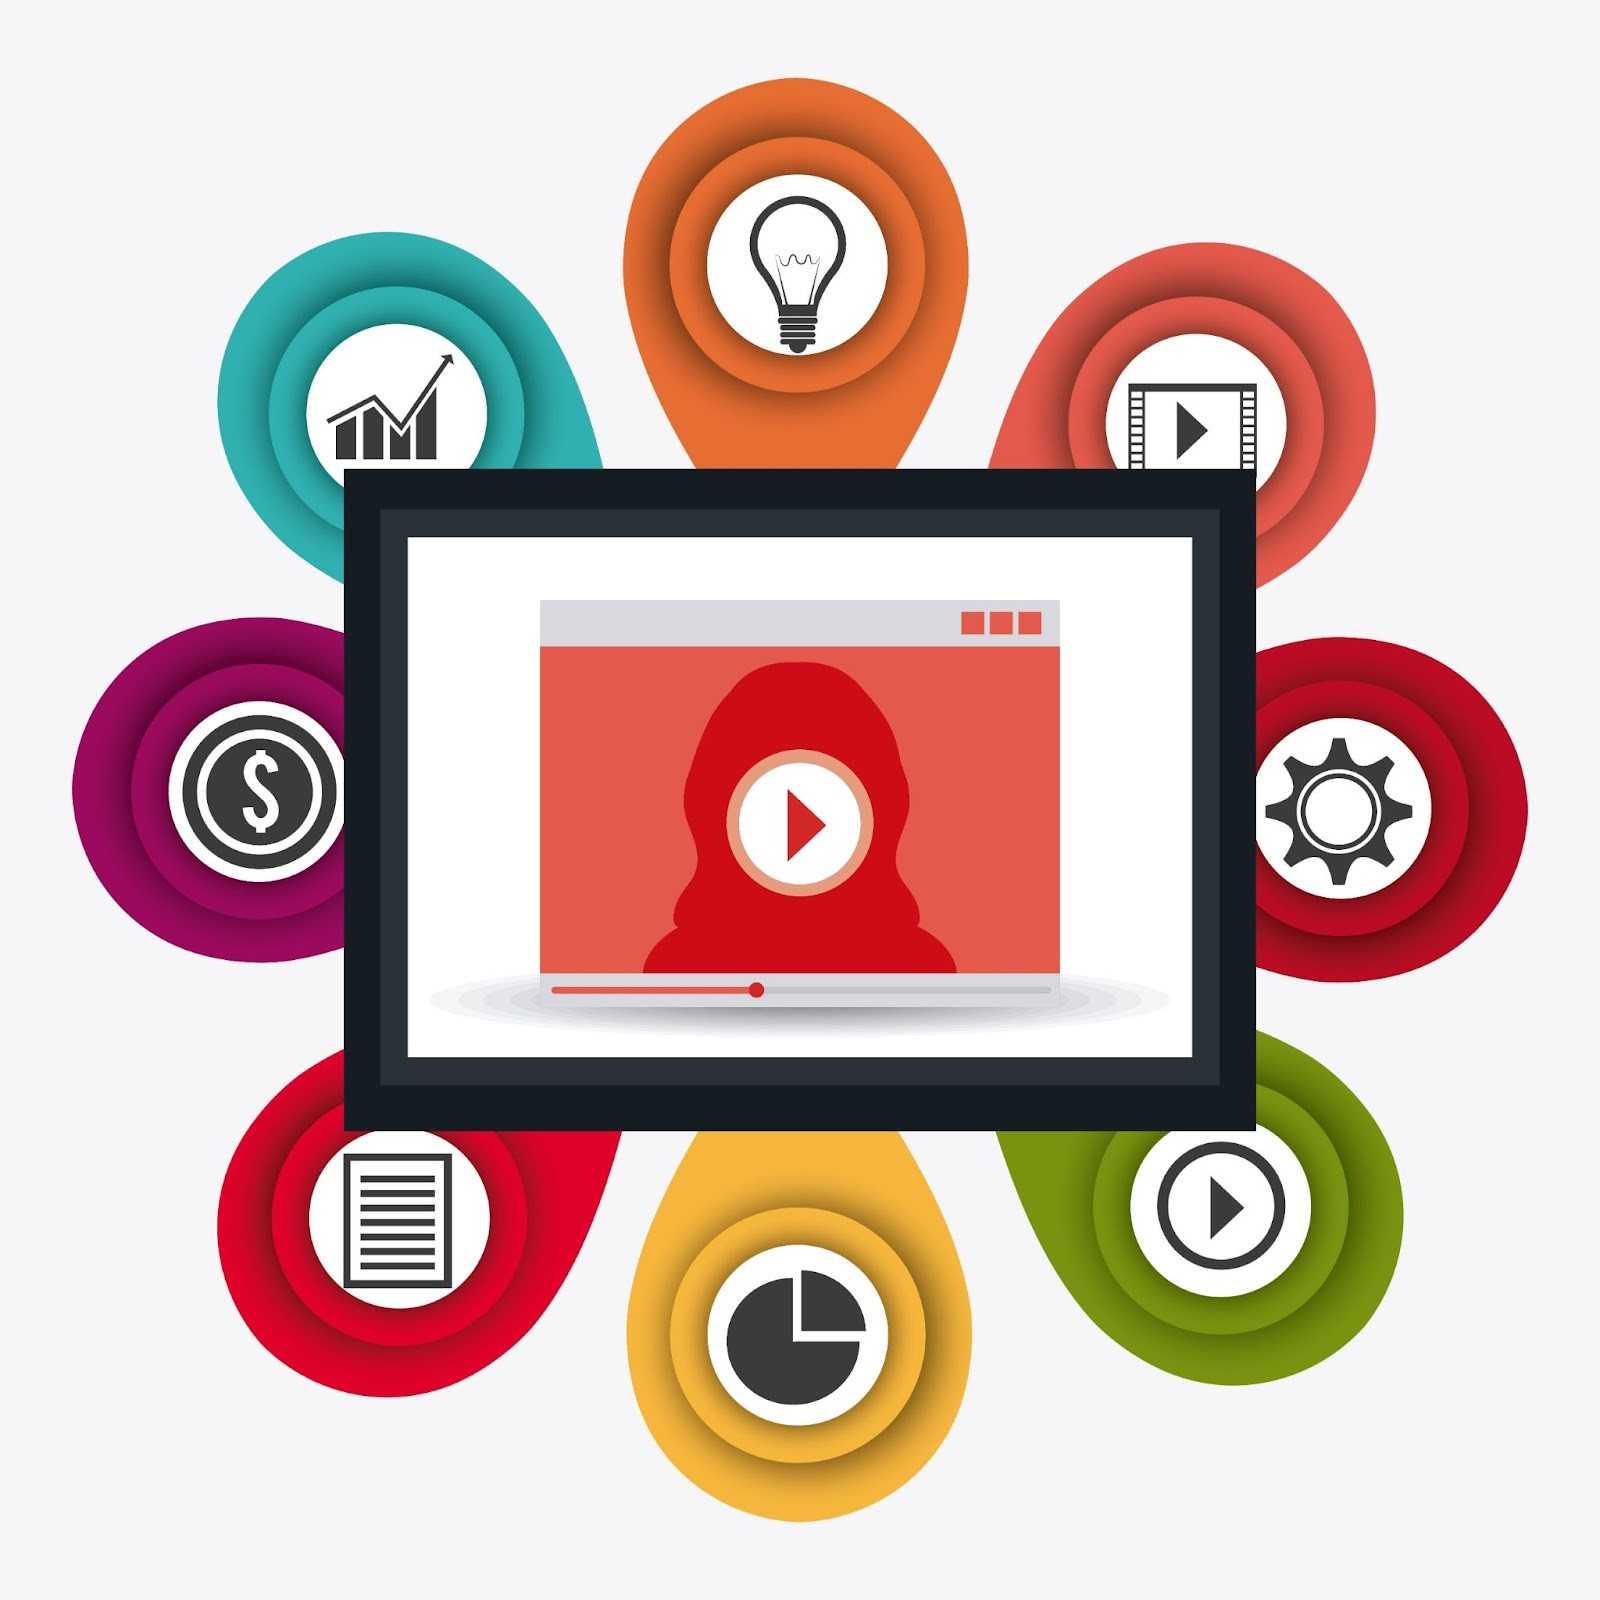 Why does Video Marketing Matter?